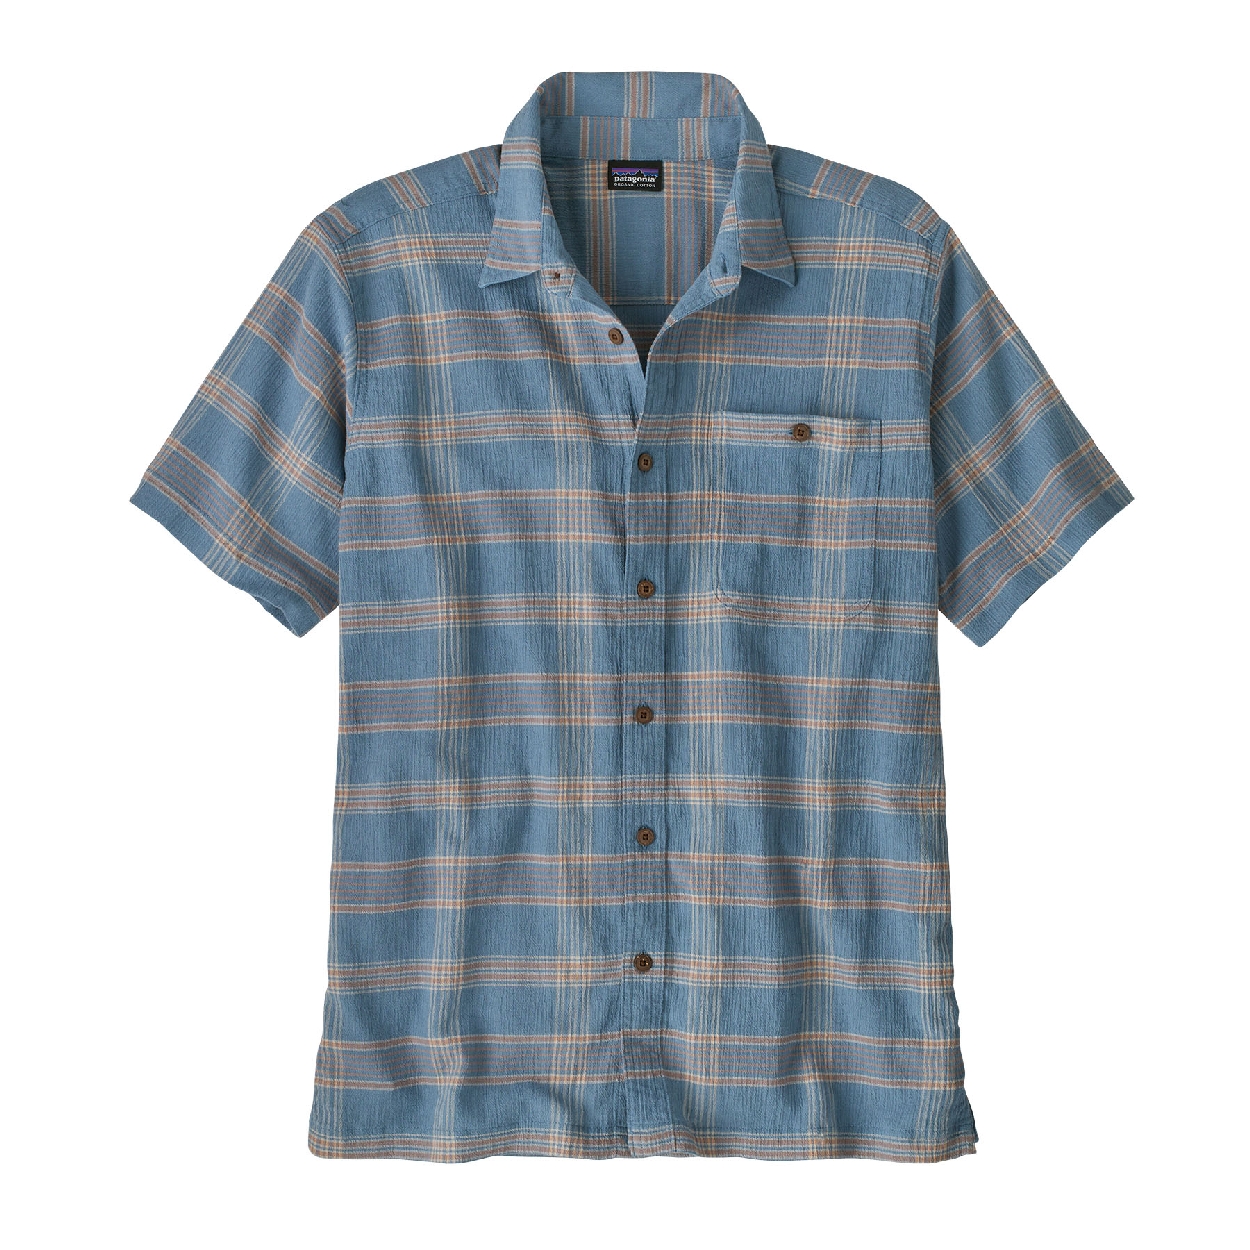 M's A/C Shirt, discovery: light plume grey